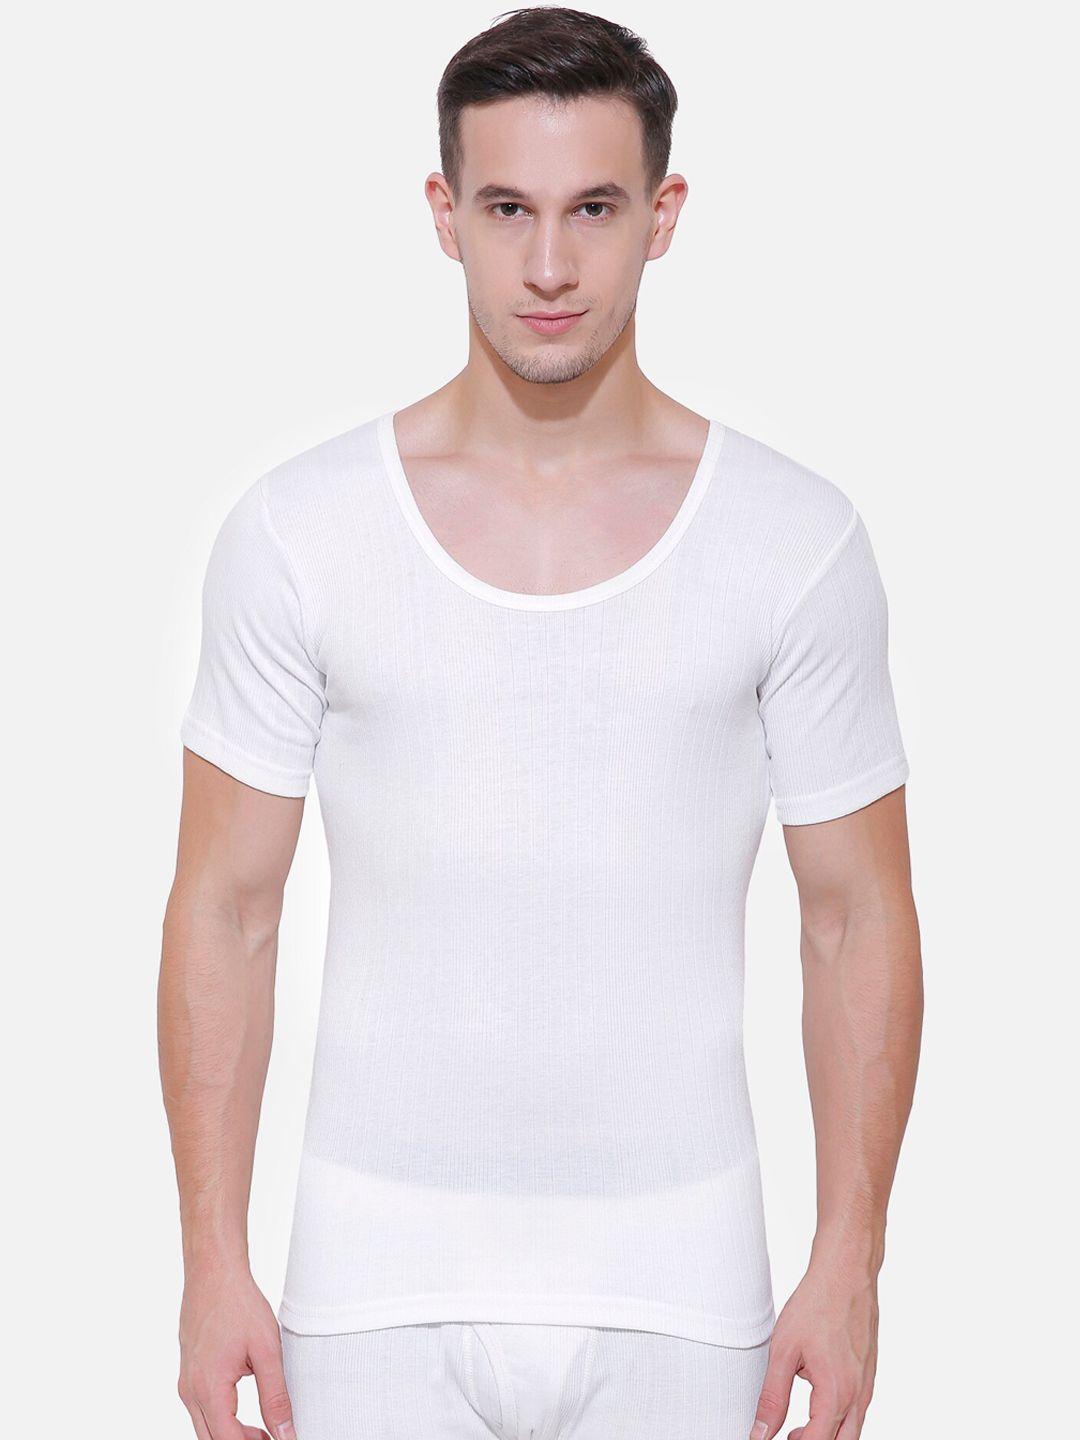 bodycare-insider-men-off-white-solid-thermal-top